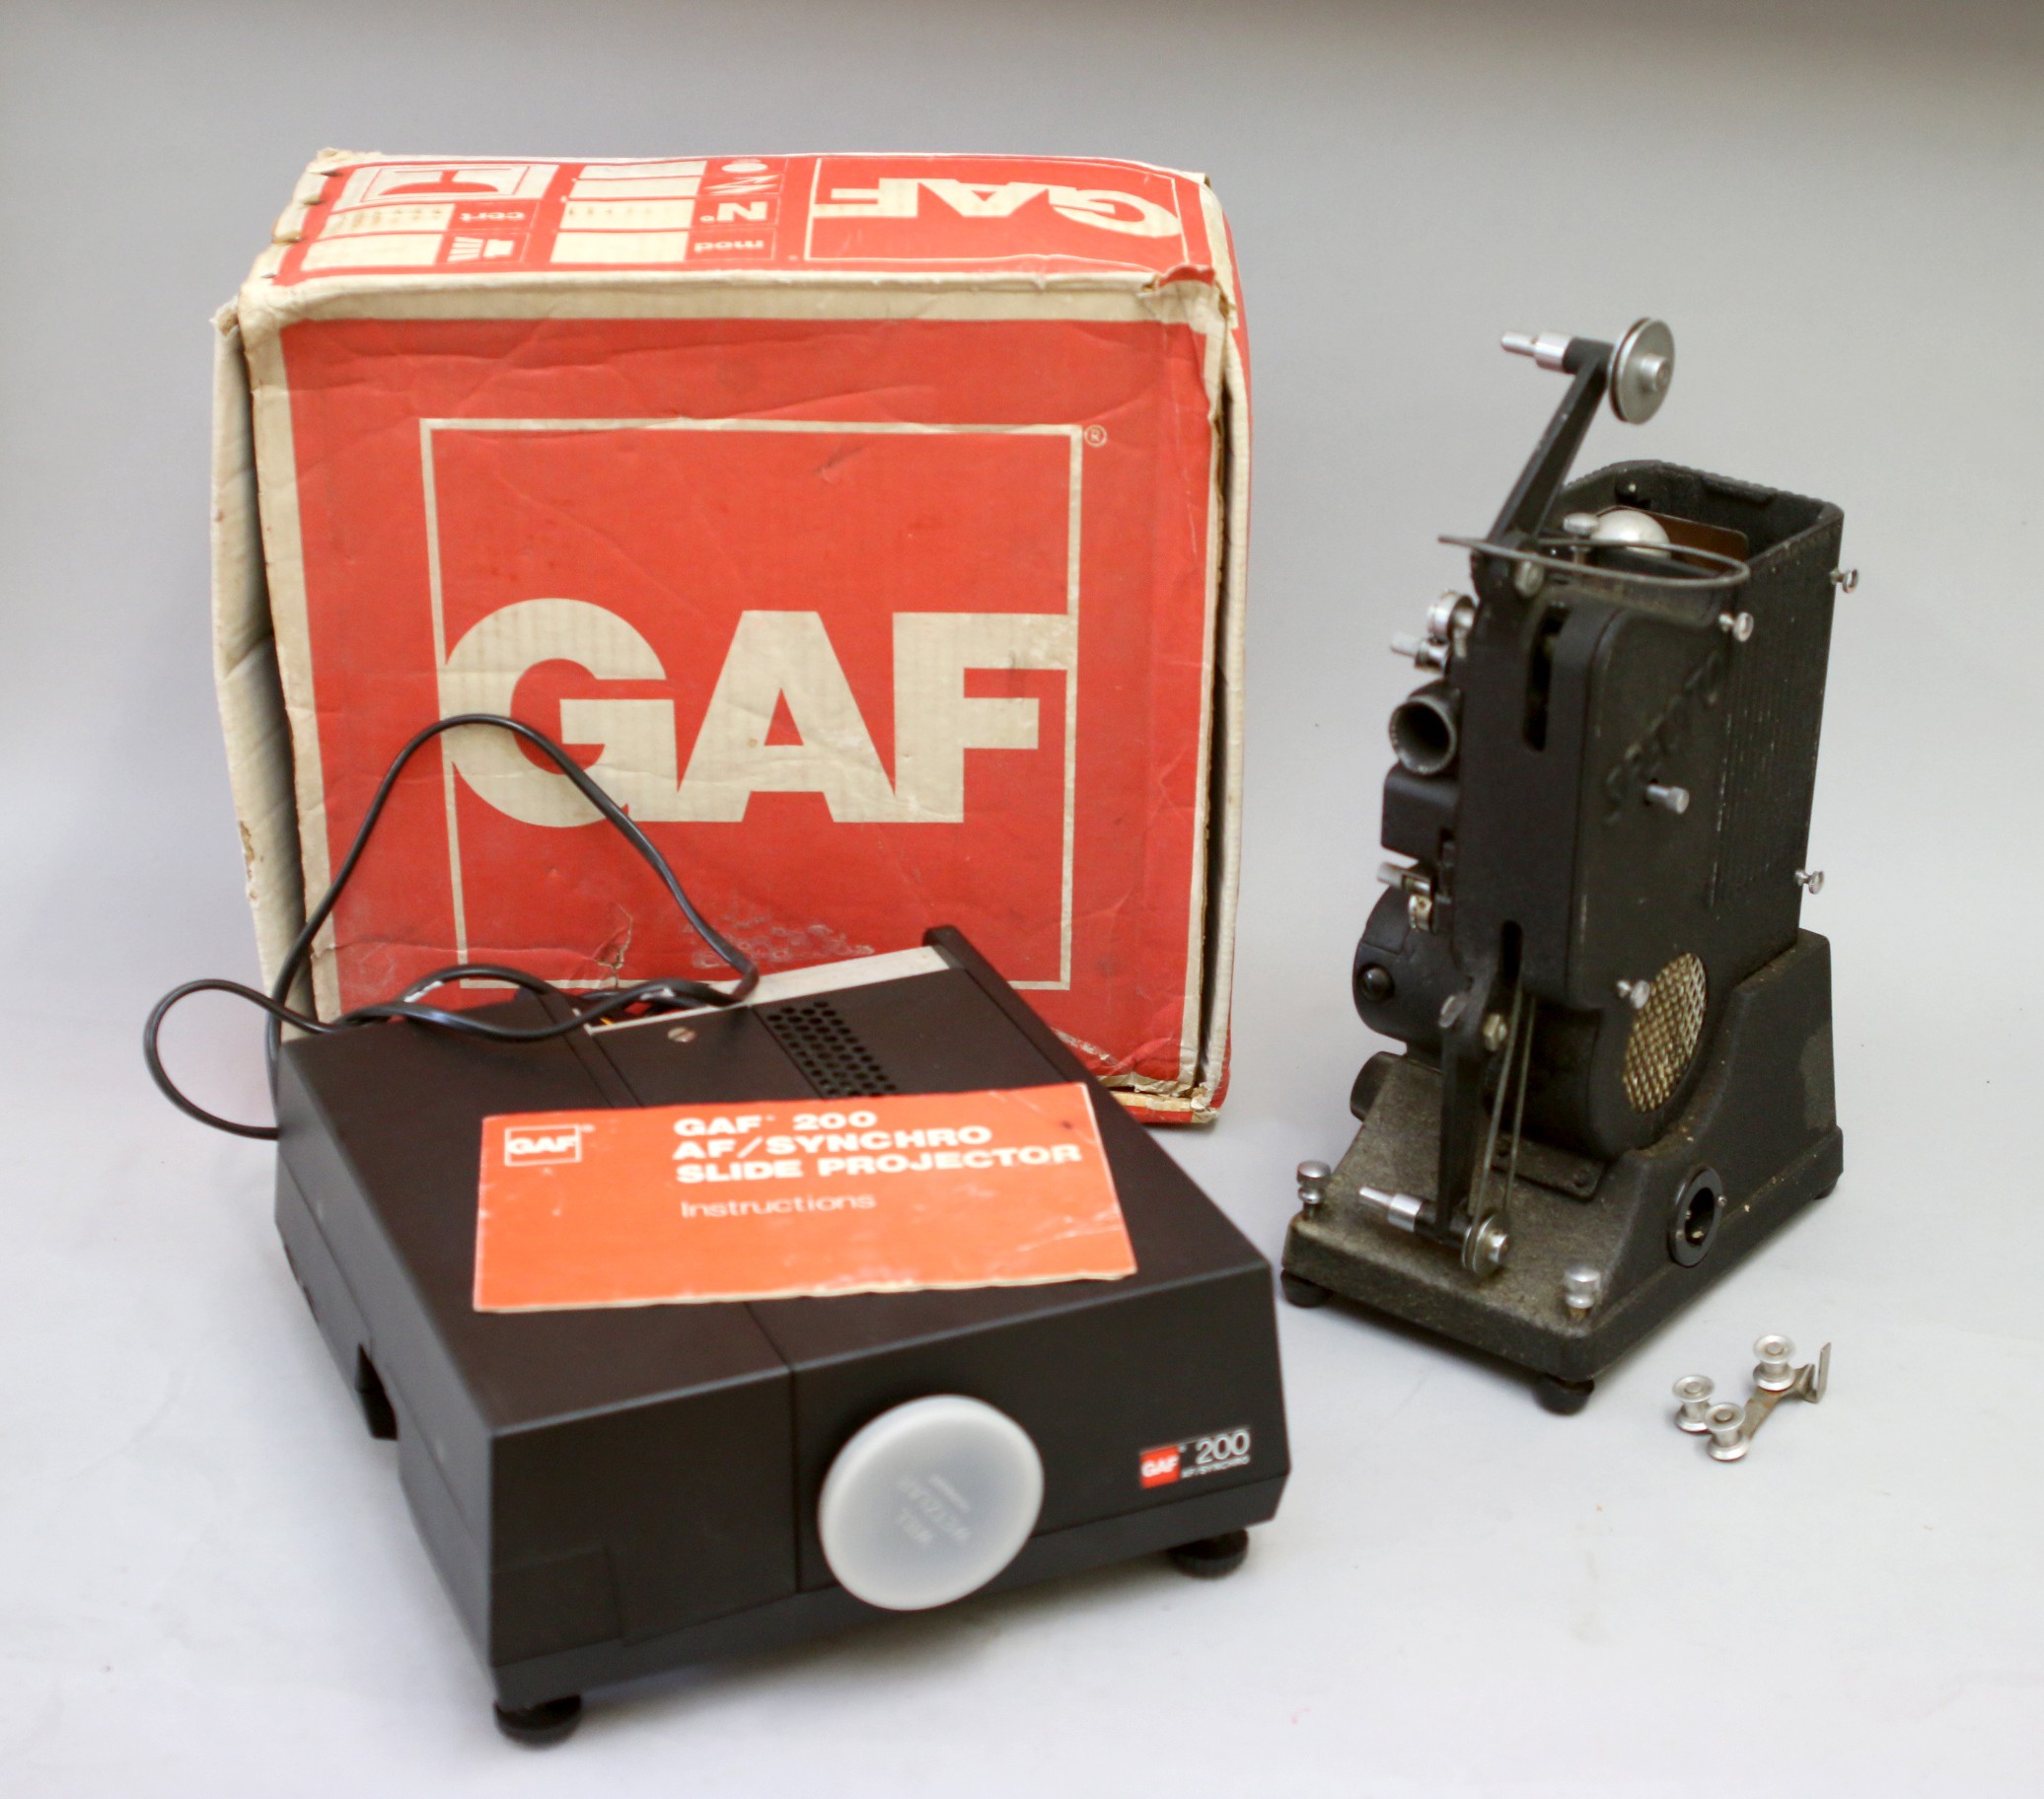 A GAF 200 AF/Synchro Slide projector, with box and manuel, together with a Specto Ltd Type C movie